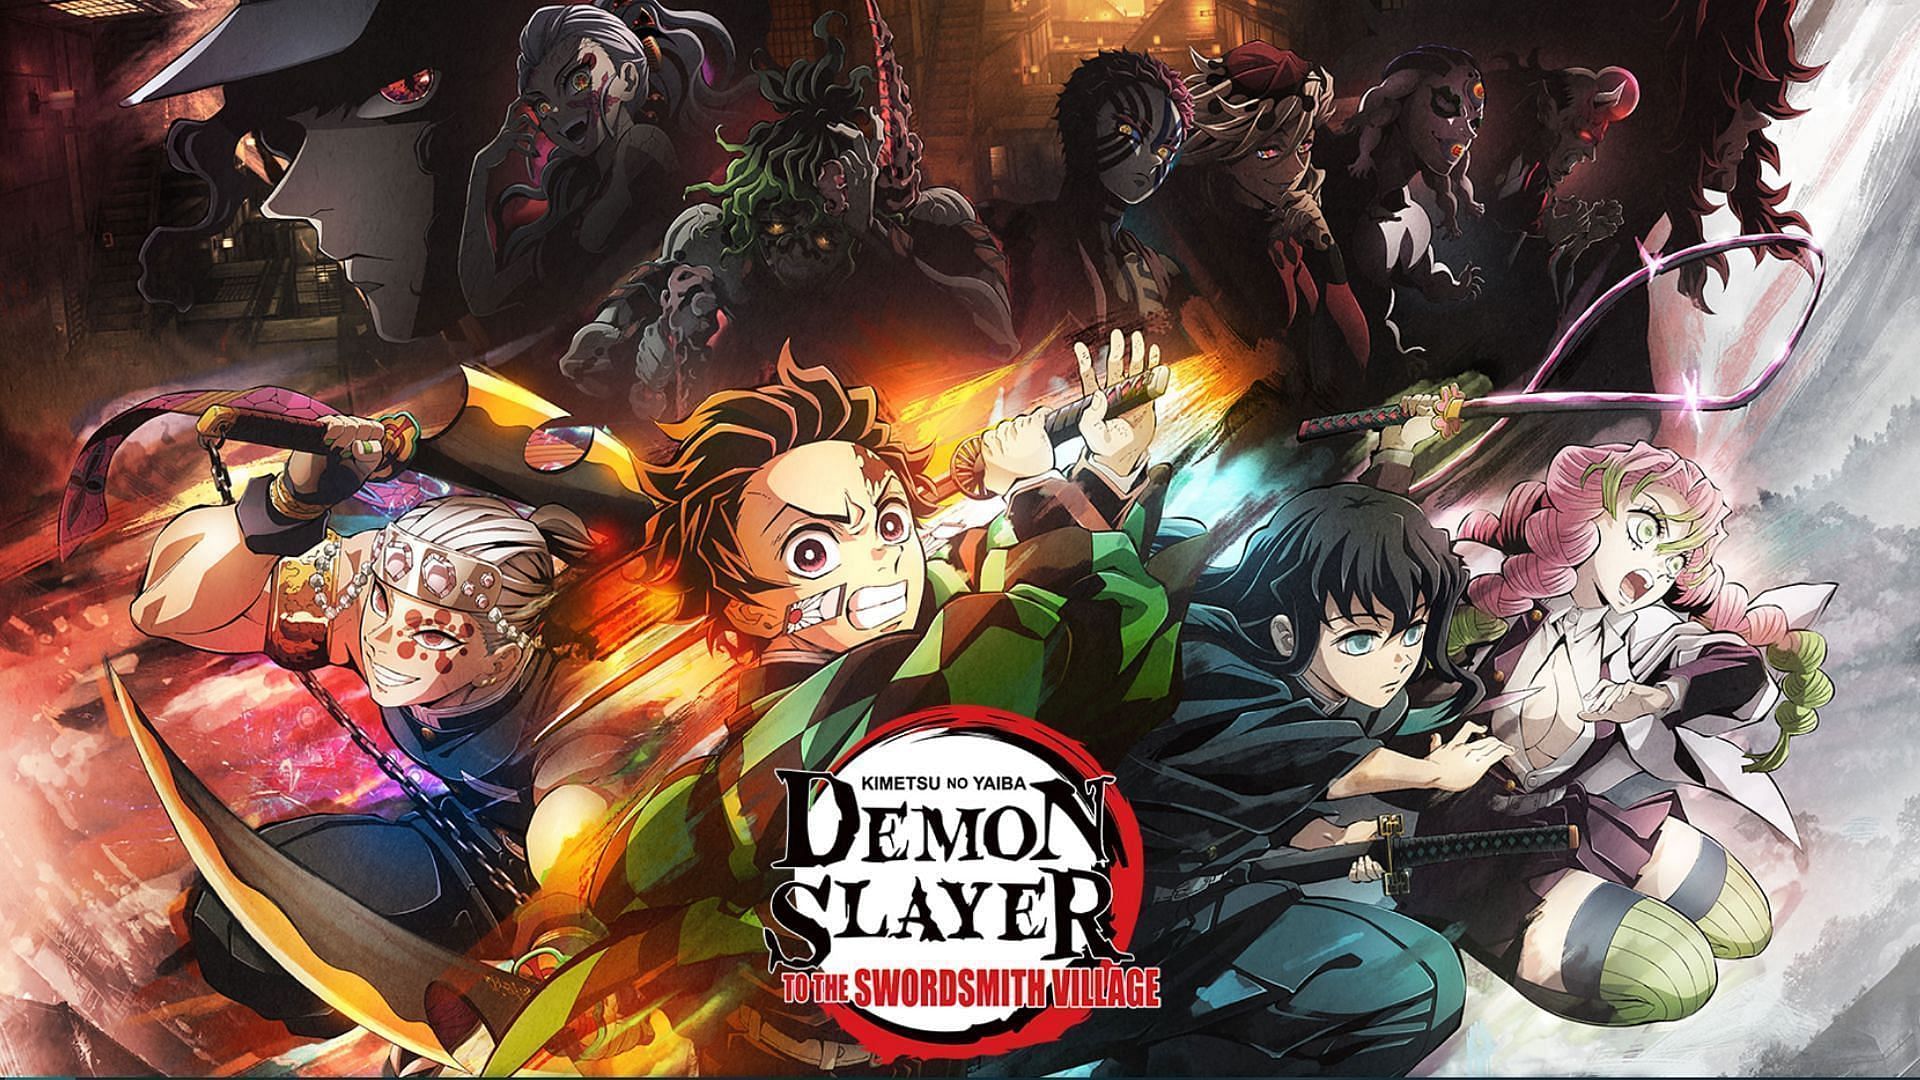 How Many Episodes in Demon Slayer Season 2 will be Released